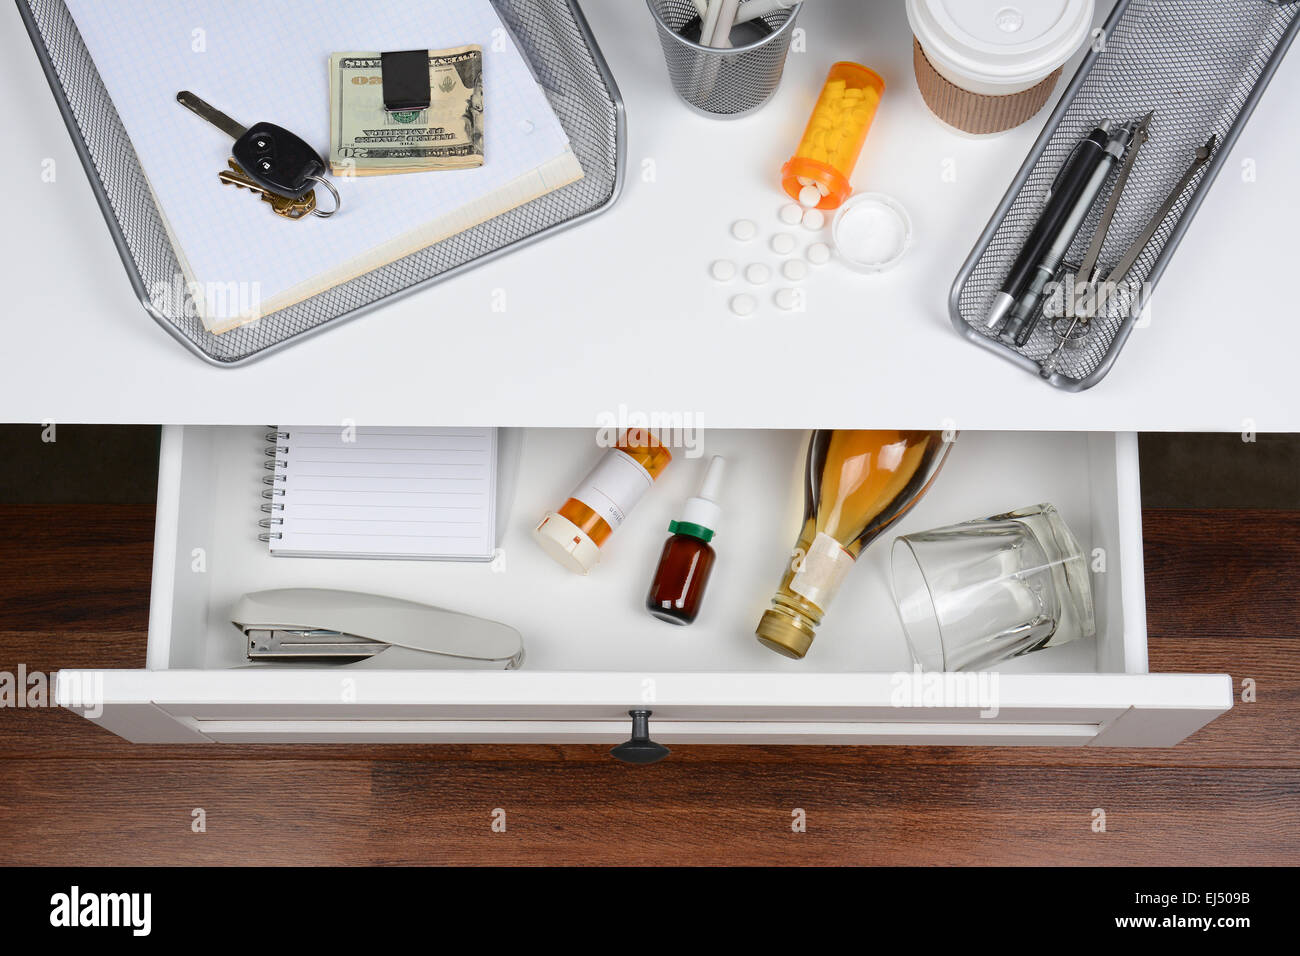 High angle shot of an open desk drawer showing the items inside. The top of the desk has a coffee cup, spilled prescription bott Stock Photo